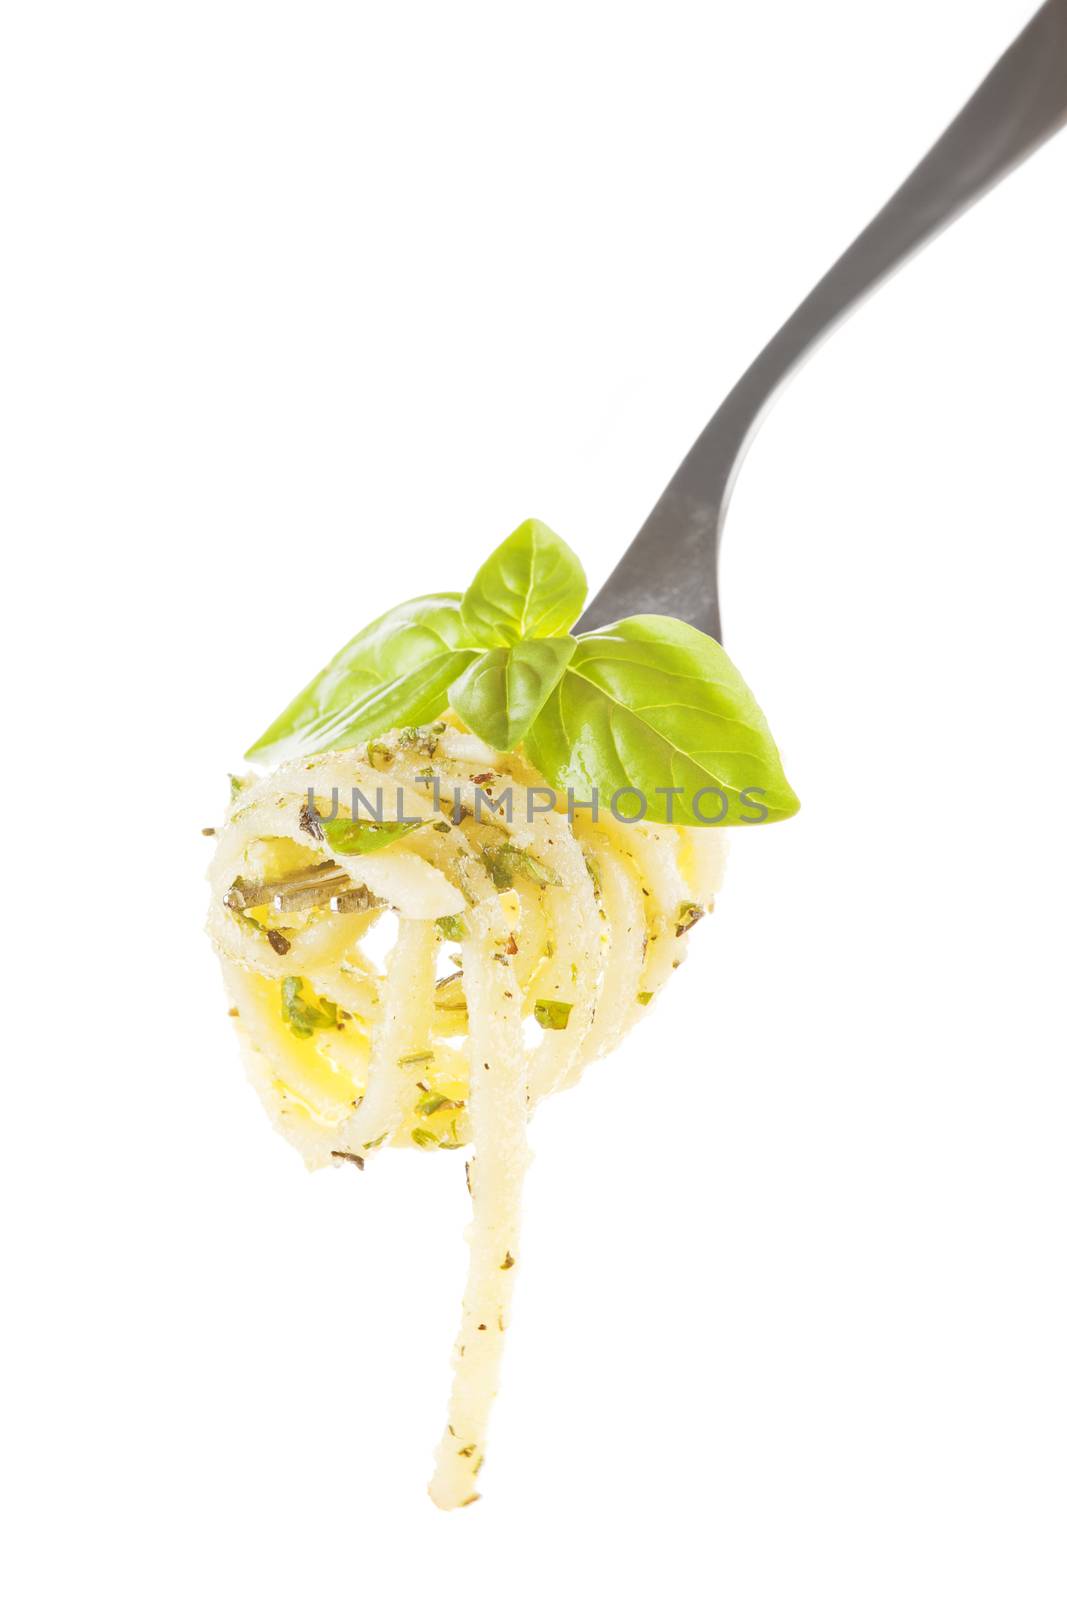  Noodle with pesto and fresh basil on fork isolated on white background. 